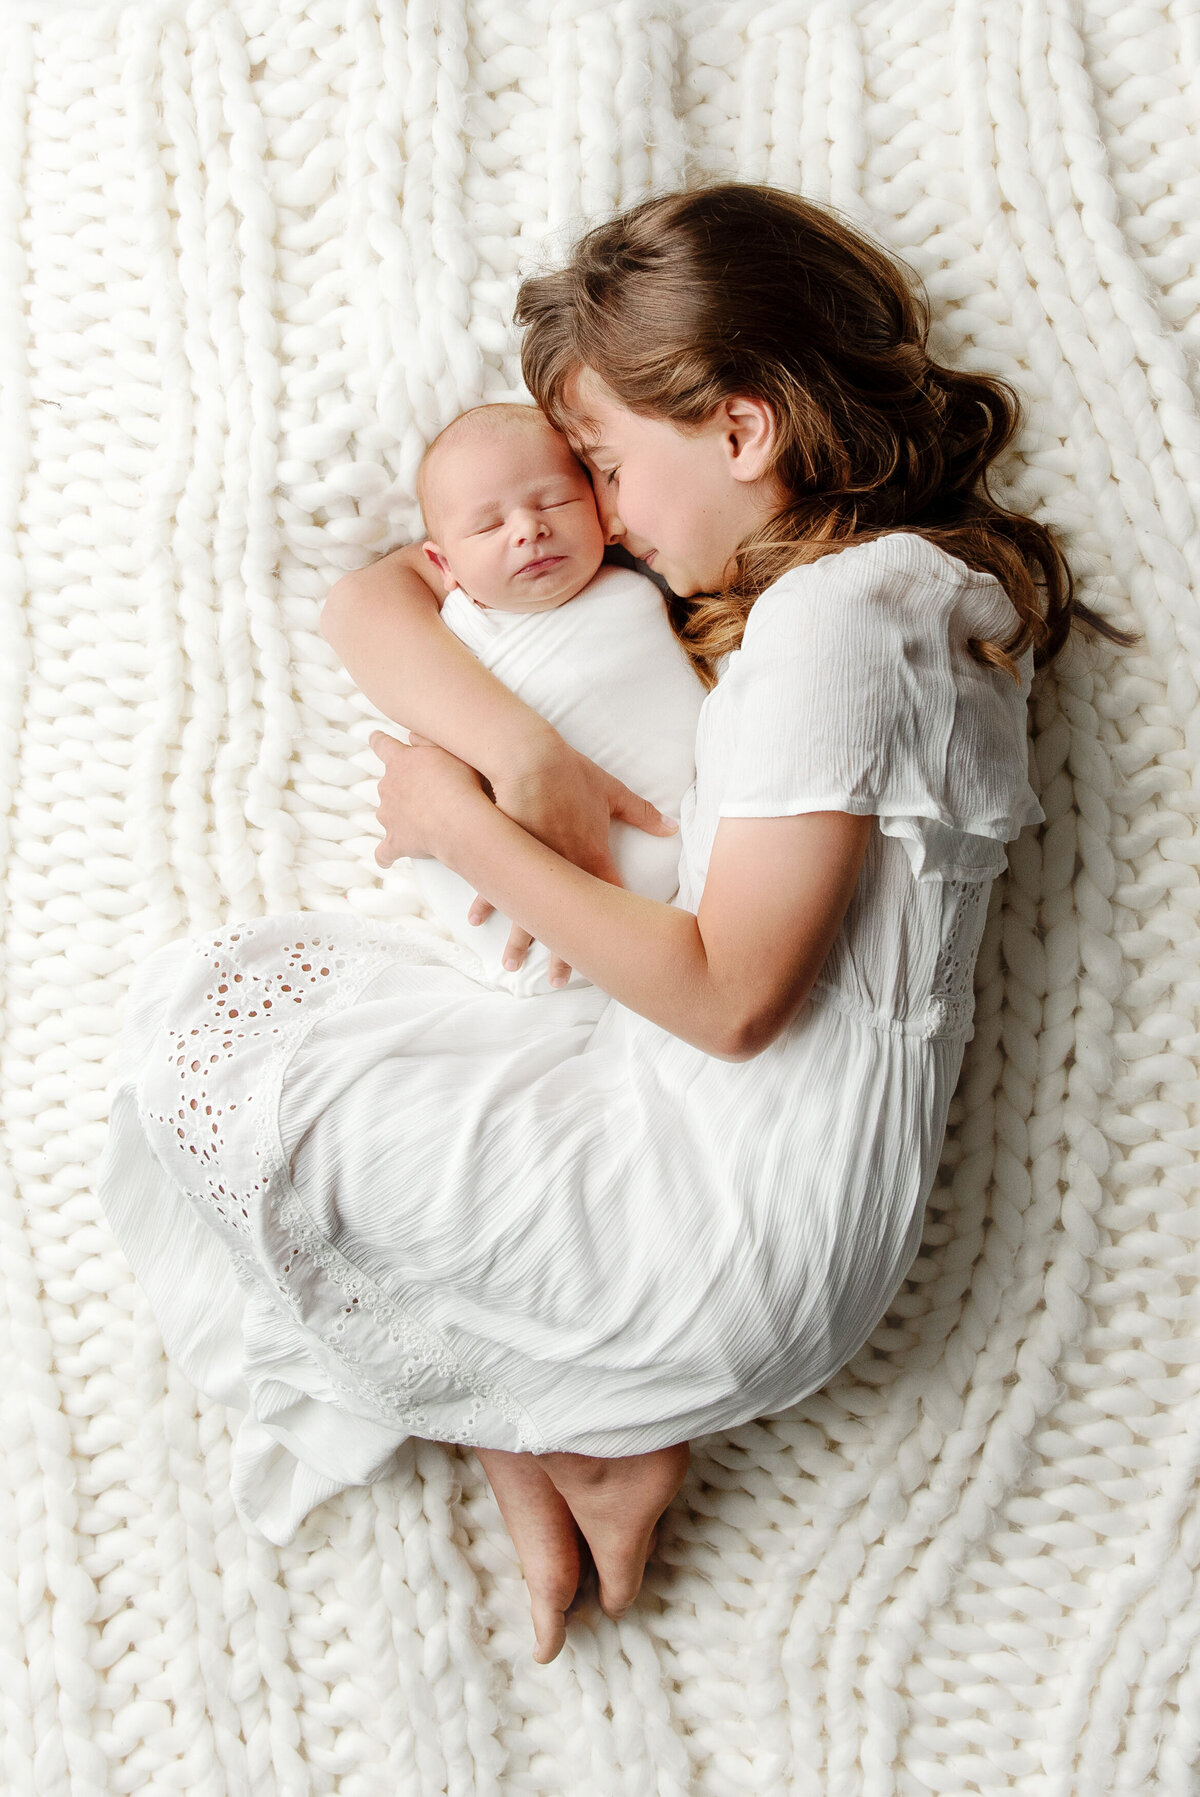 st-louis-newborn-photographer-baby-snuggled-by-big-sister-in-monocromatic-white-outfits-on-white-knitted-blanket